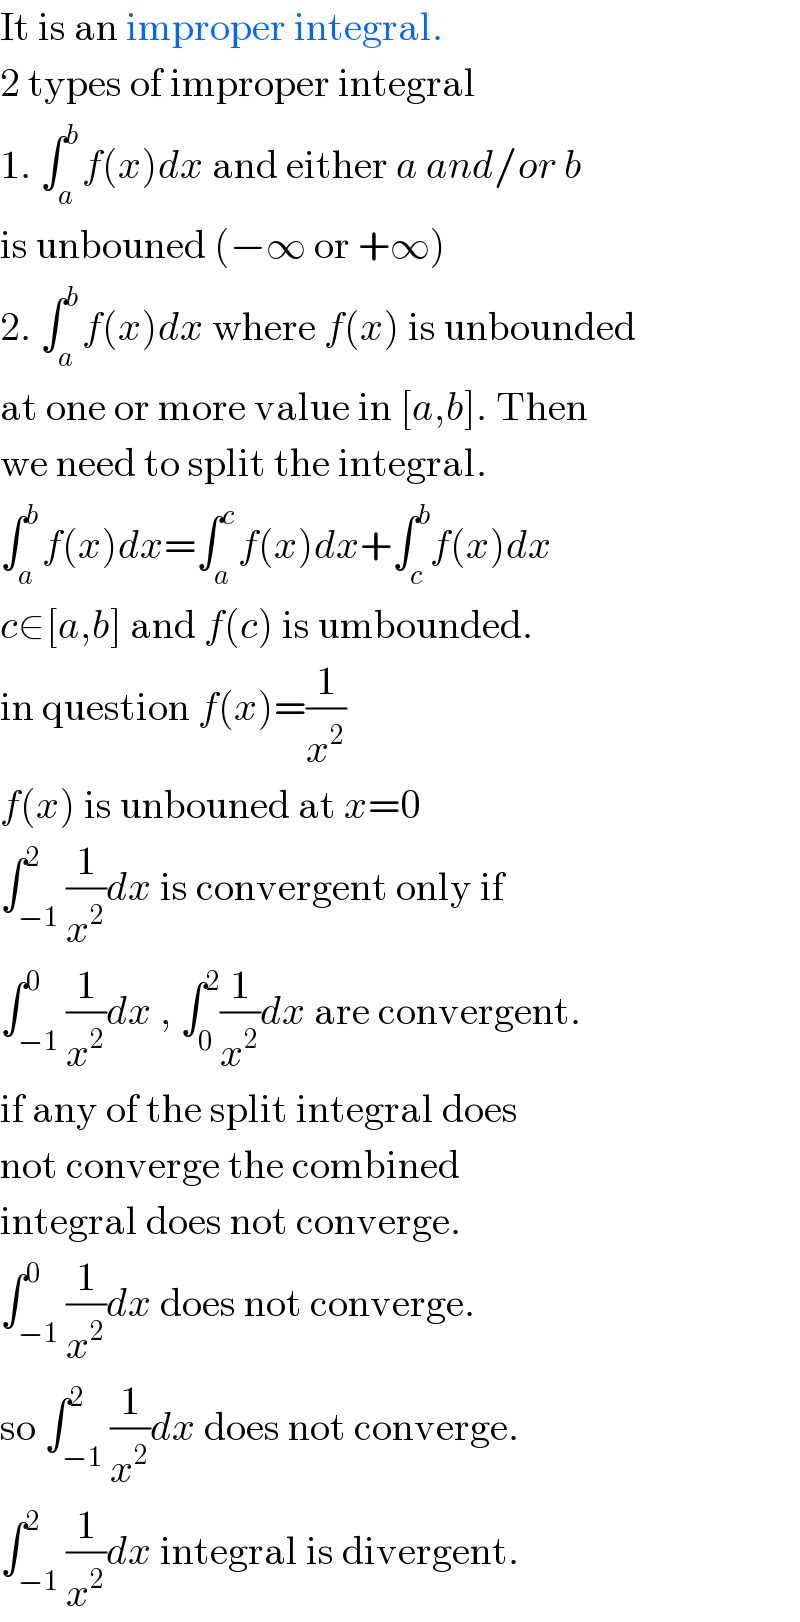 It is an improper integral.  2 types of improper integral  1. ∫_a ^b f(x)dx and either a and/or b  is unbouned (−∞ or +∞)  2. ∫_a ^b f(x)dx where f(x) is unbounded  at one or more value in [a,b]. Then  we need to split the integral.  ∫_a ^b f(x)dx=∫_a ^c f(x)dx+∫_c ^b f(x)dx  c∈[a,b] and f(c) is umbounded.  in question f(x)=(1/x^2 )  f(x) is unbouned at x=0  ∫_(−1) ^2 (1/x^2 )dx is convergent only if  ∫_(−1) ^0 (1/x^2 )dx , ∫_0 ^2 (1/x^2 )dx are convergent.  if any of the split integral does  not converge the combined  integral does not converge.  ∫_(−1) ^0 (1/x^2 )dx does not converge.  so ∫_(−1) ^2 (1/x^2 )dx does not converge.  ∫_(−1) ^2 (1/x^2 )dx integral is divergent.  